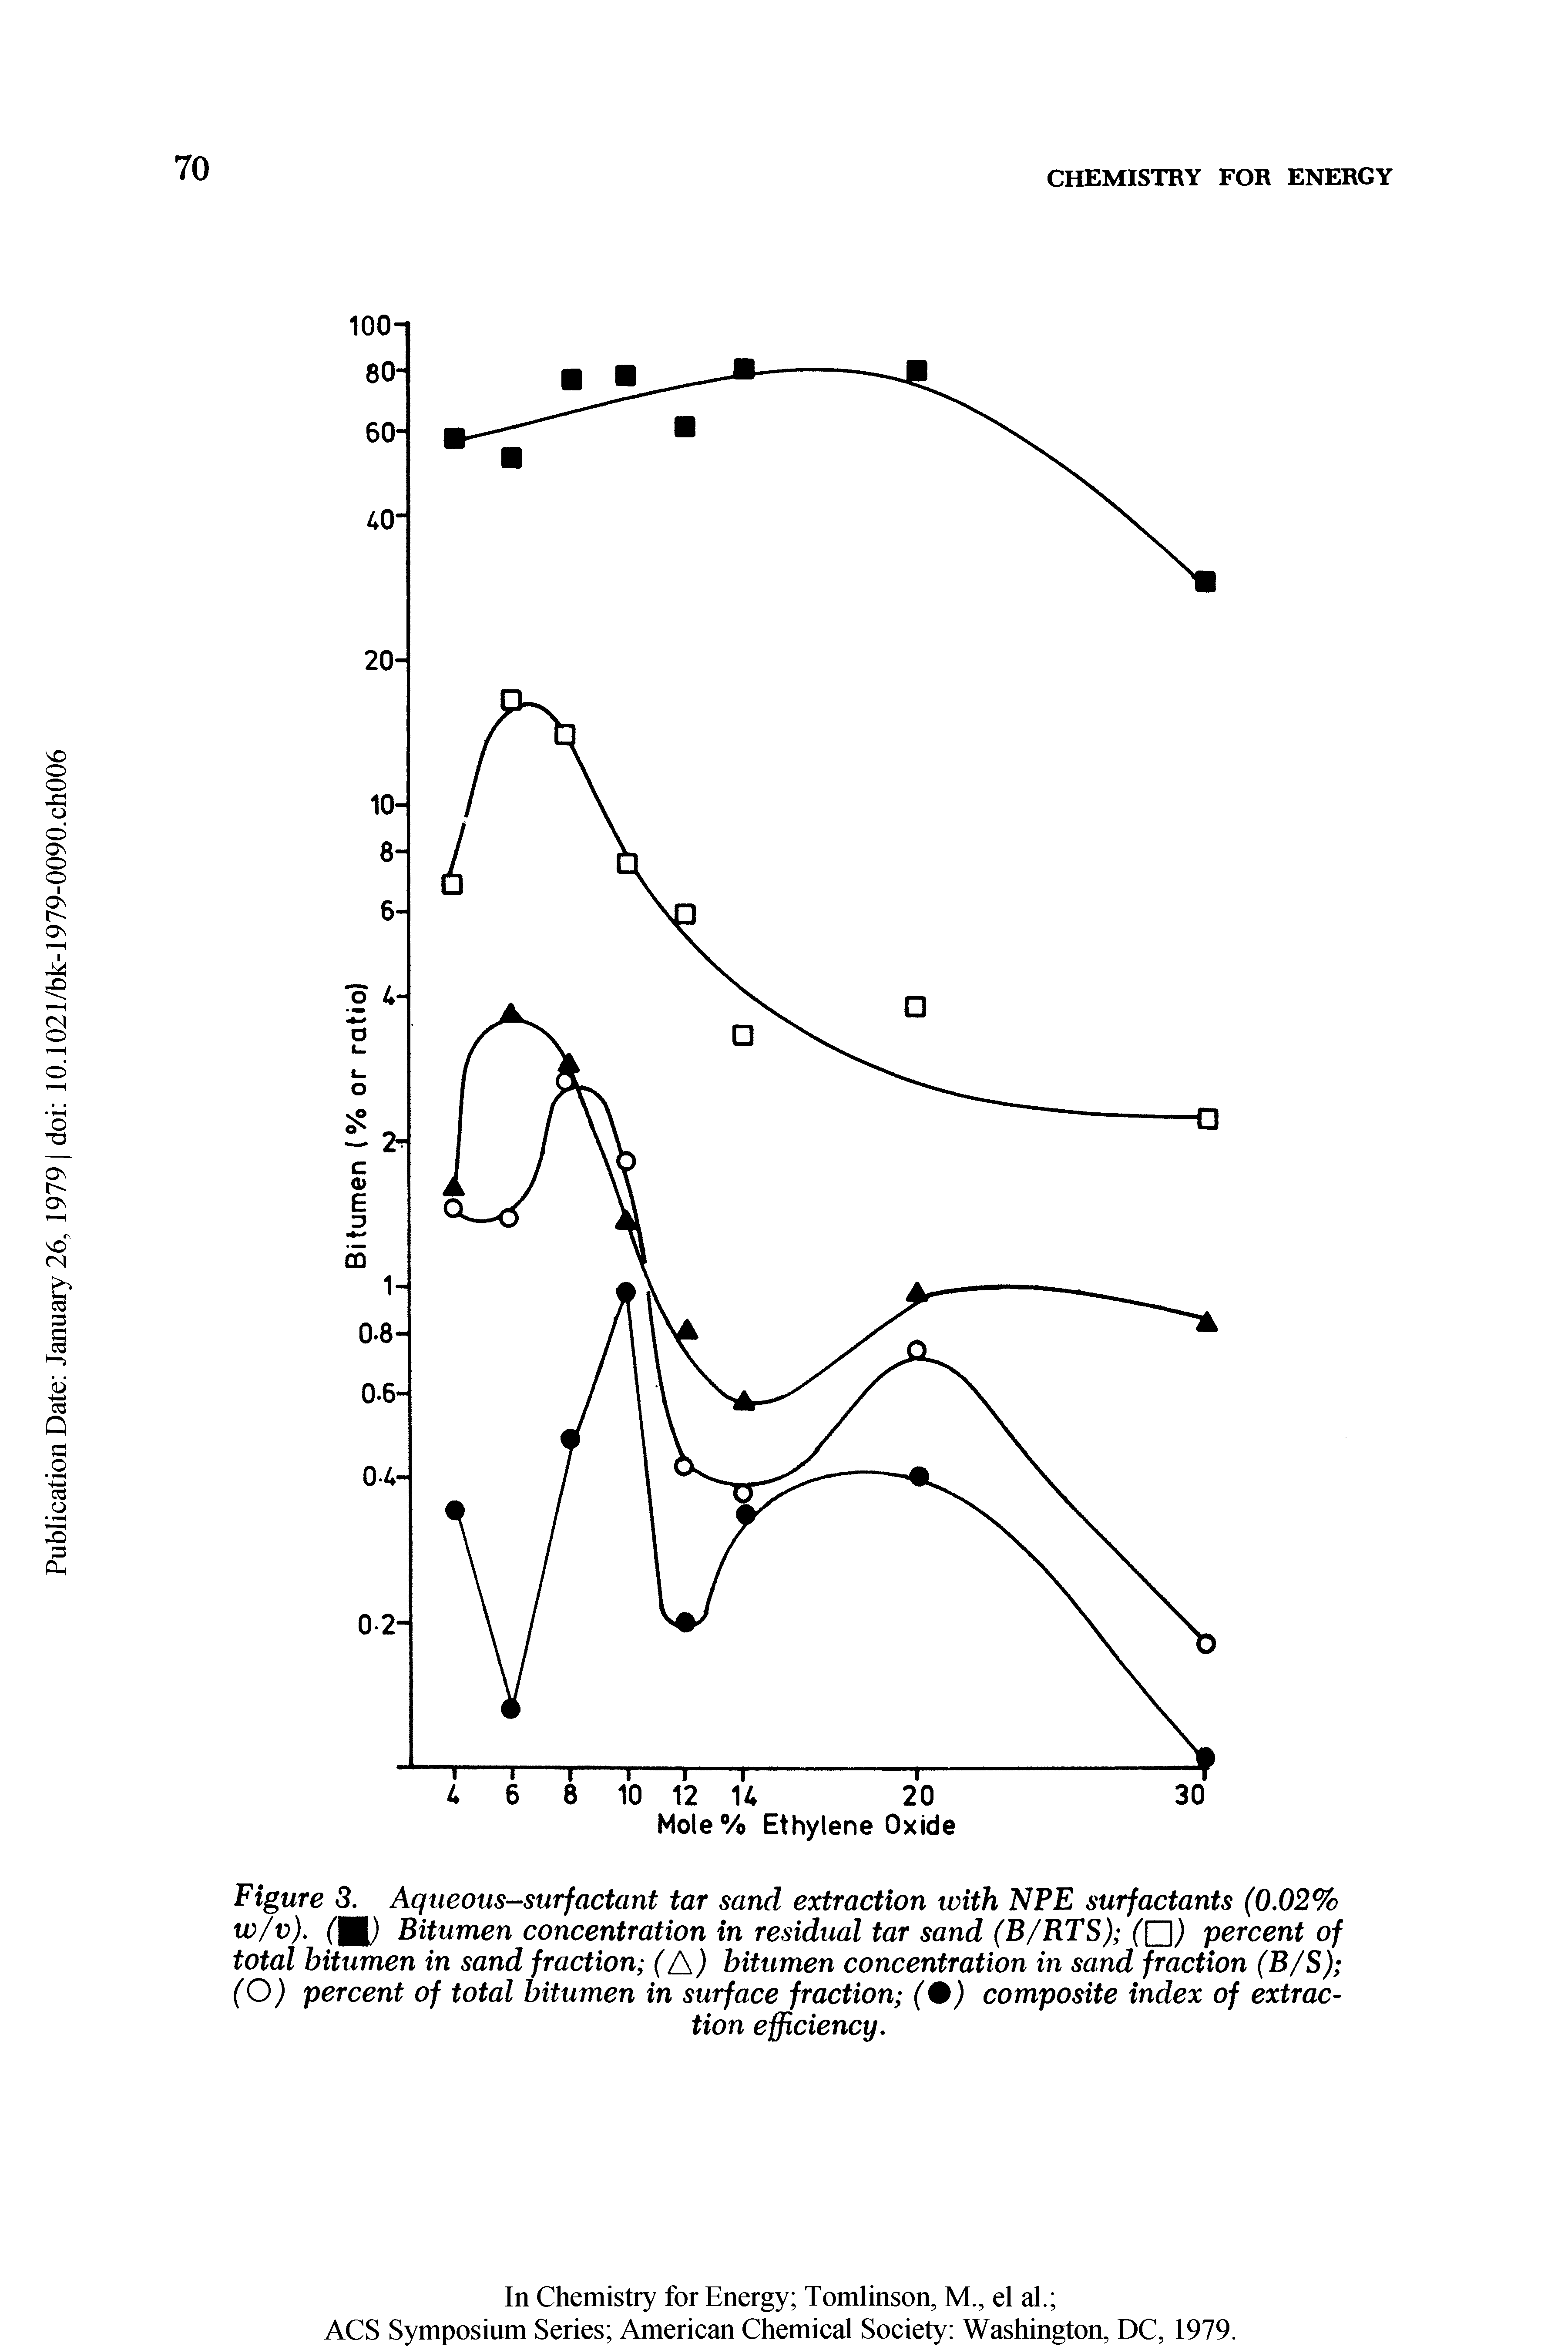 Figure 3. Aqueous-surfactant tar sand extraction with NPE surfactants (0.02% (M) Bitumen concentration in residual tar sand (B/RTS) percent of total bitumen in sand fraction (/ ) bitumen concentration in sand fraction (B/S) (O) percent of total bitumen in surface fraction (0) composite index of extraction efficiency.